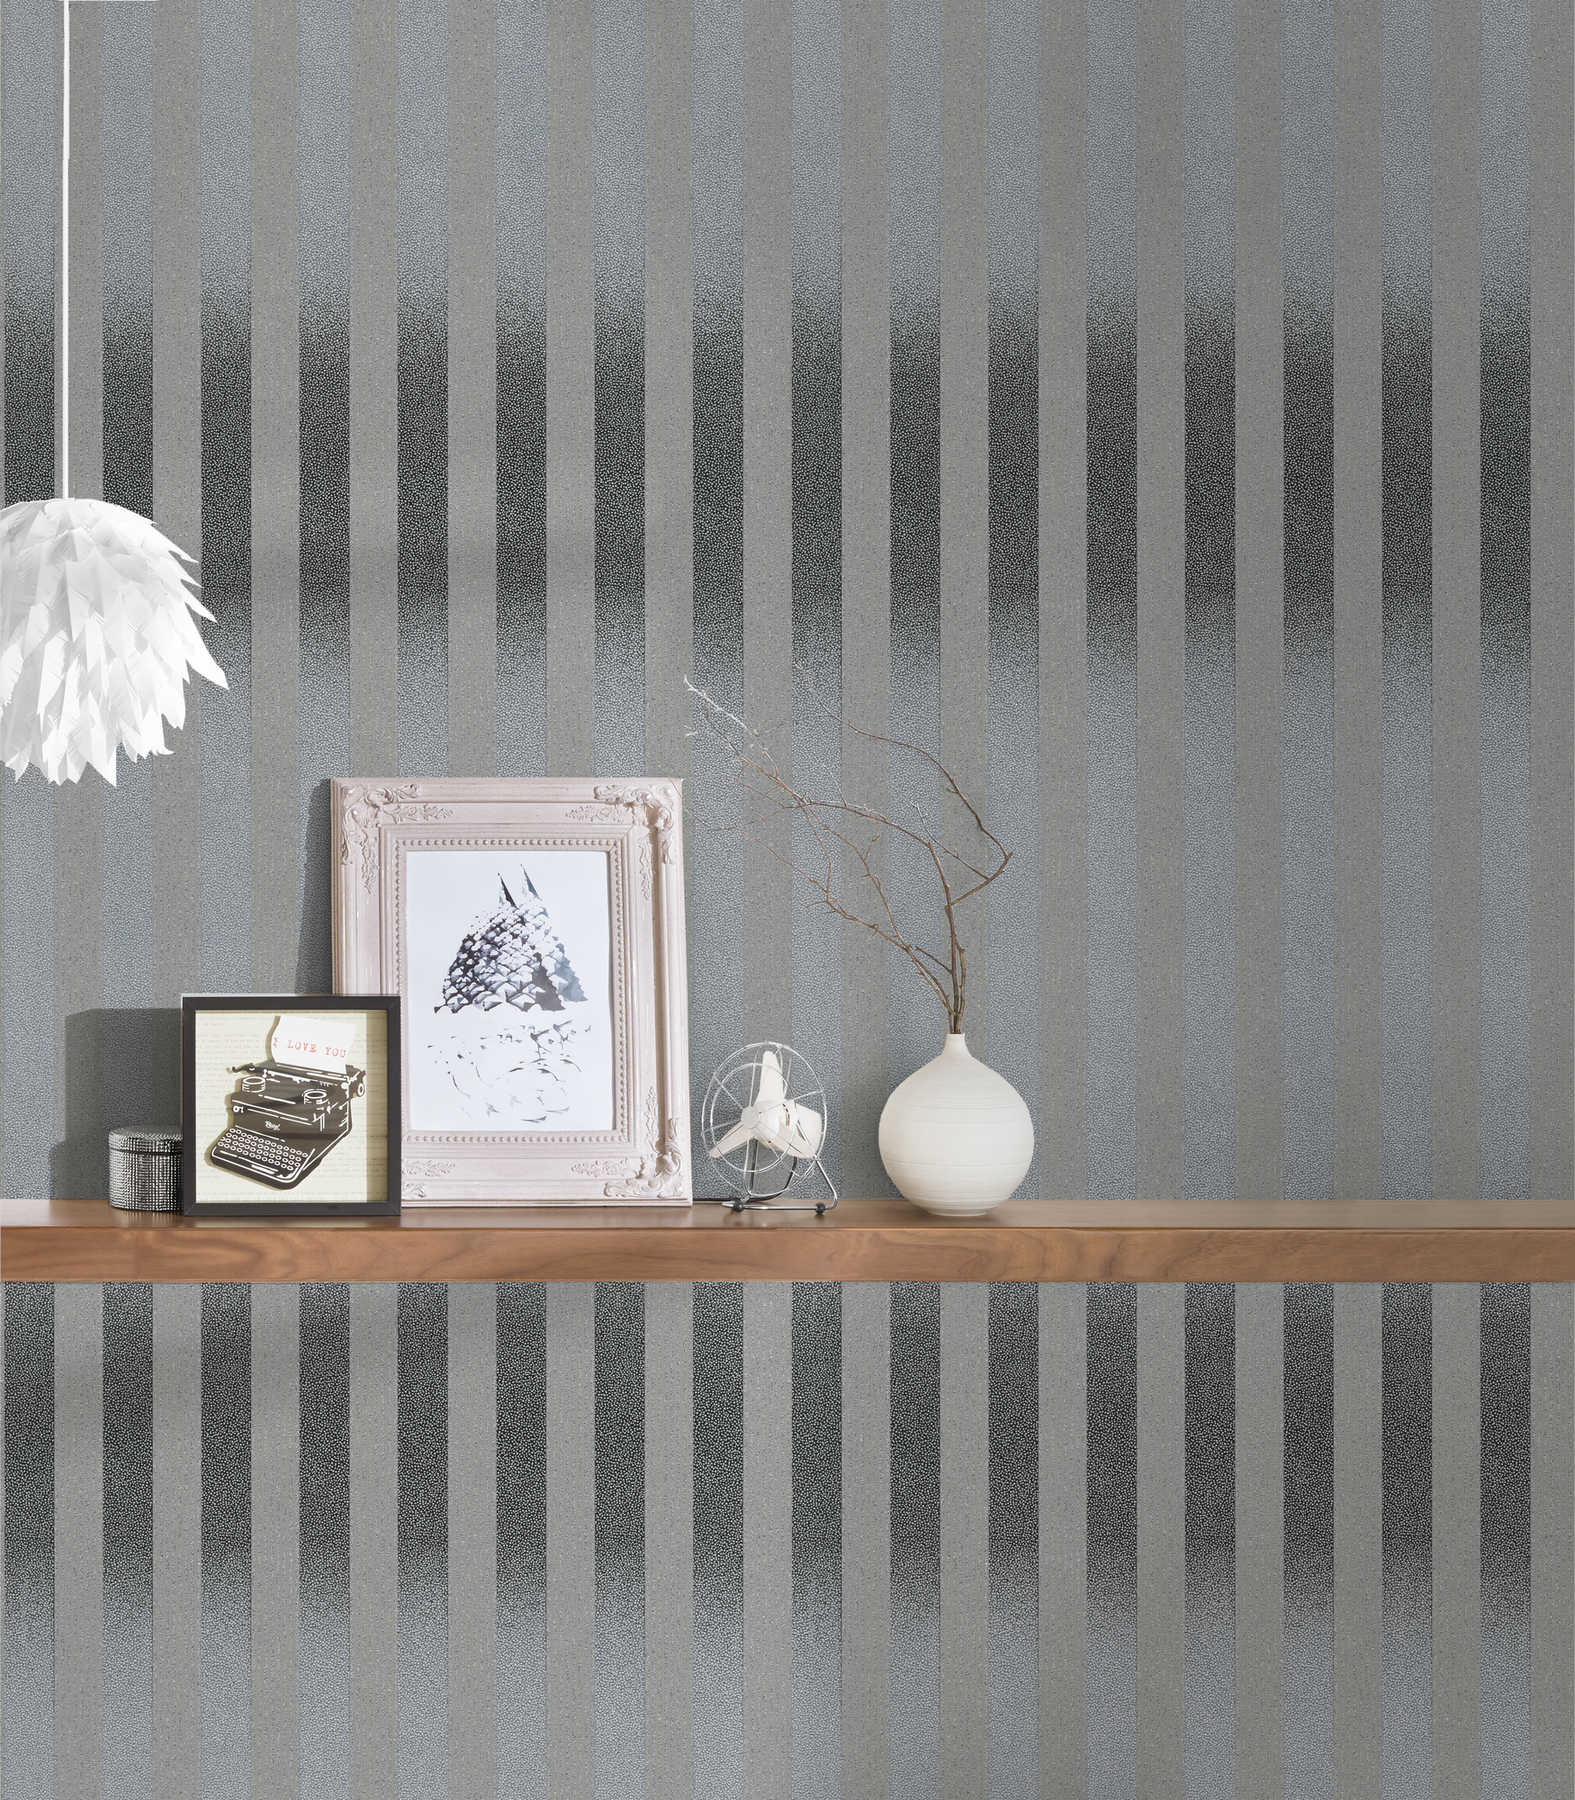             Striped wallpaper with small dot pattern and colour gradient - black, grey
        